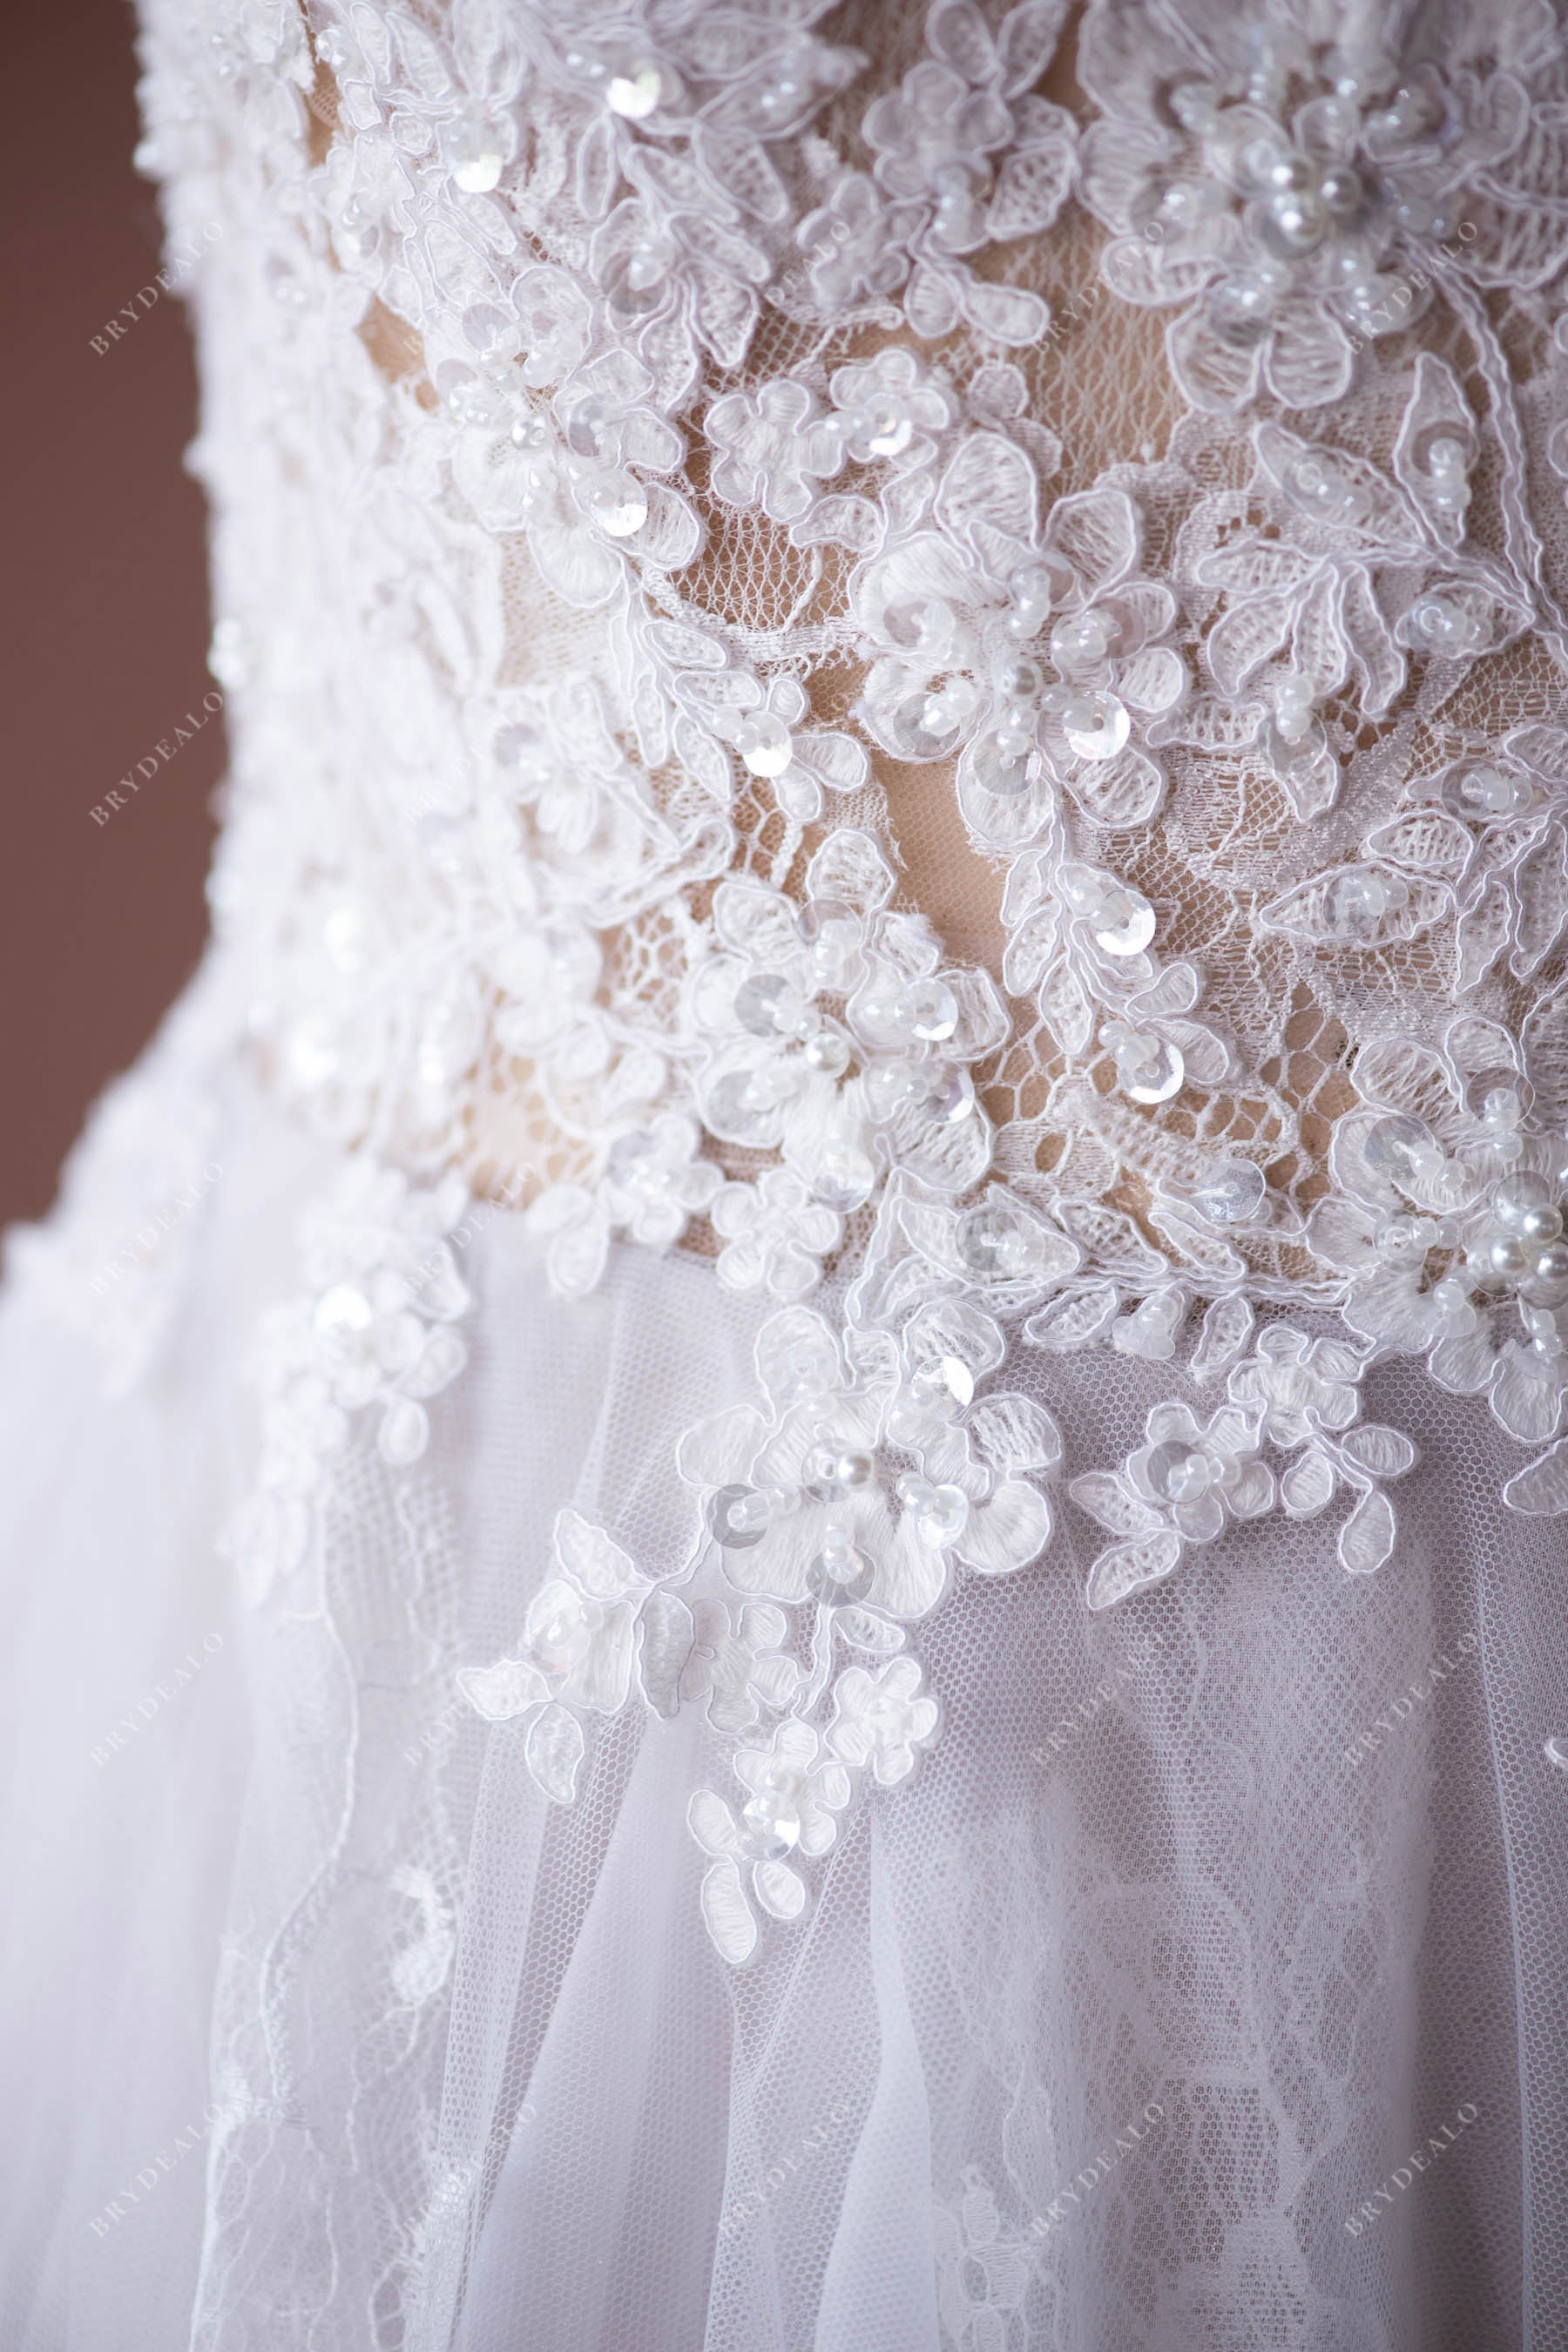 Sample Sale Beaded Floral Lace Puffy Ruffled Wedding Dress